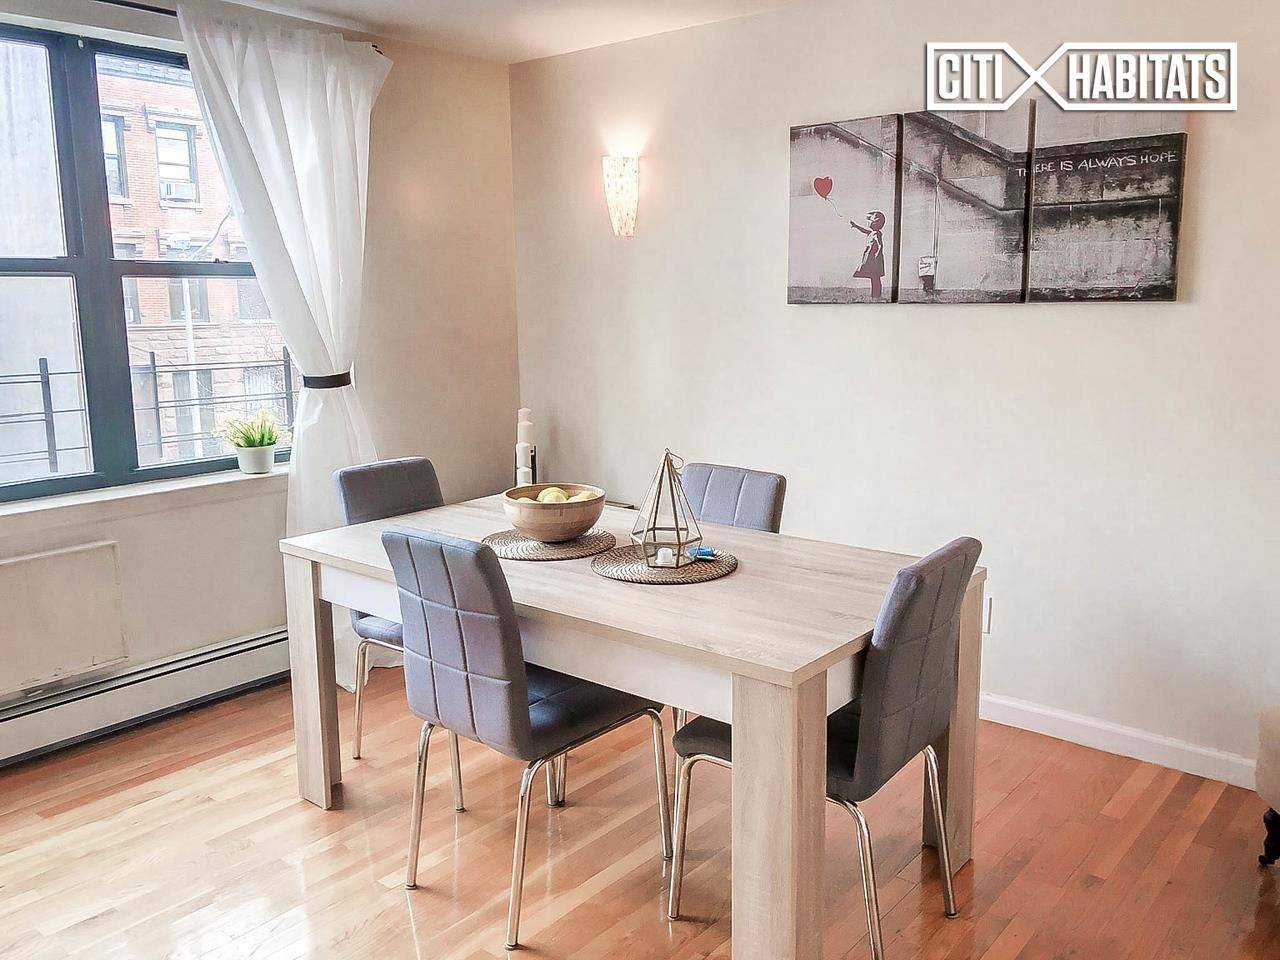 Vacant 3 Family ! ! ! 34 West 128th located on 128th Street between Lenox Avenue and 5th Avenue is an 25' wide 3 family residential townhouse with a myriad ...